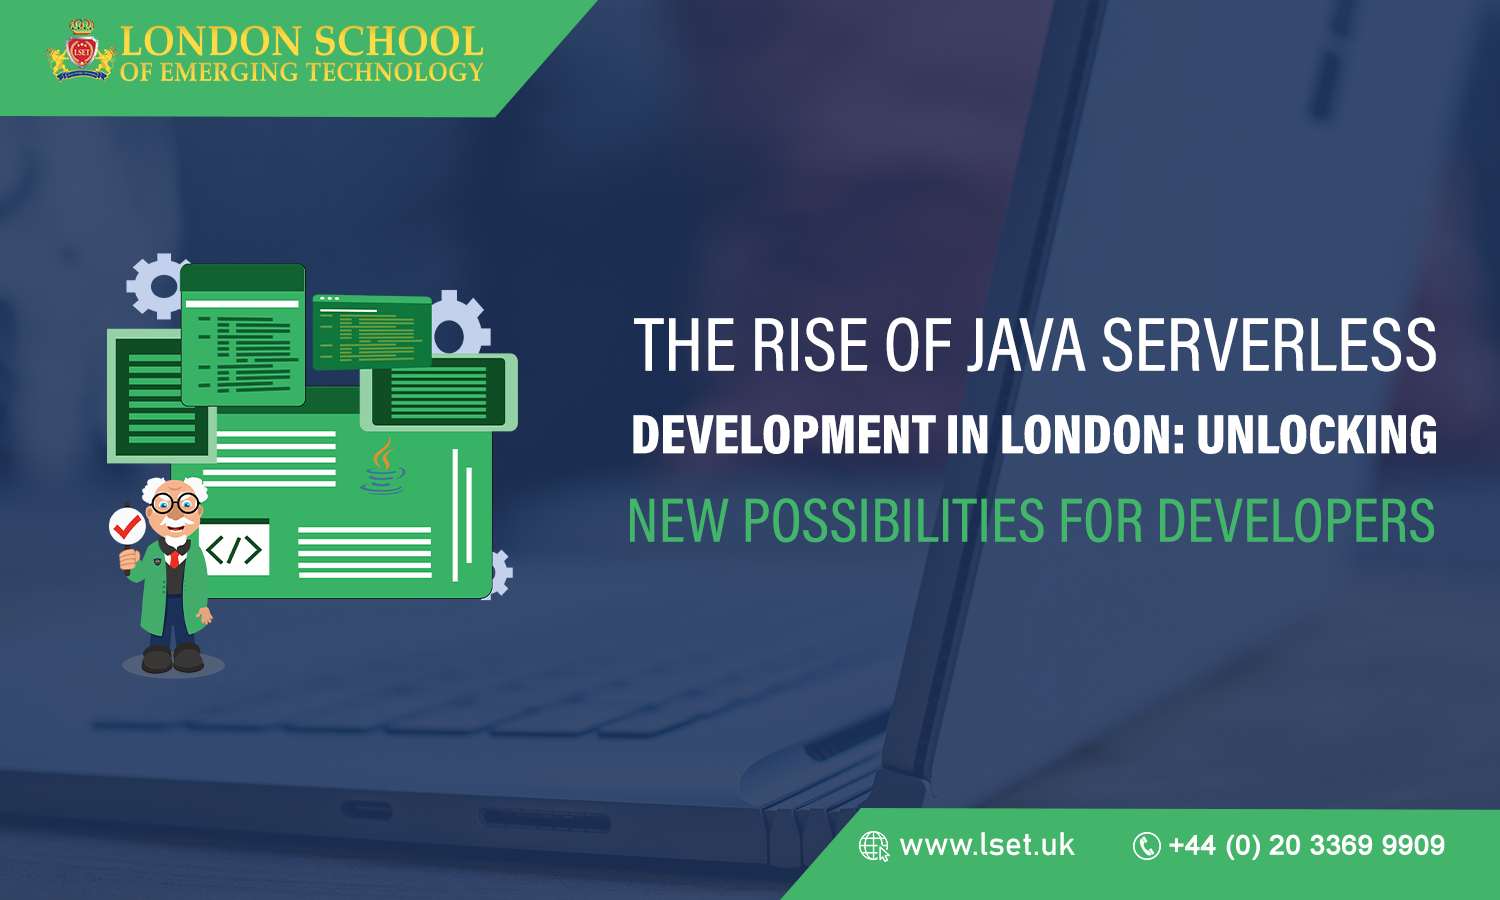 The Rise of Java Serverless Development in London Unlocking New Possibilities for Developers